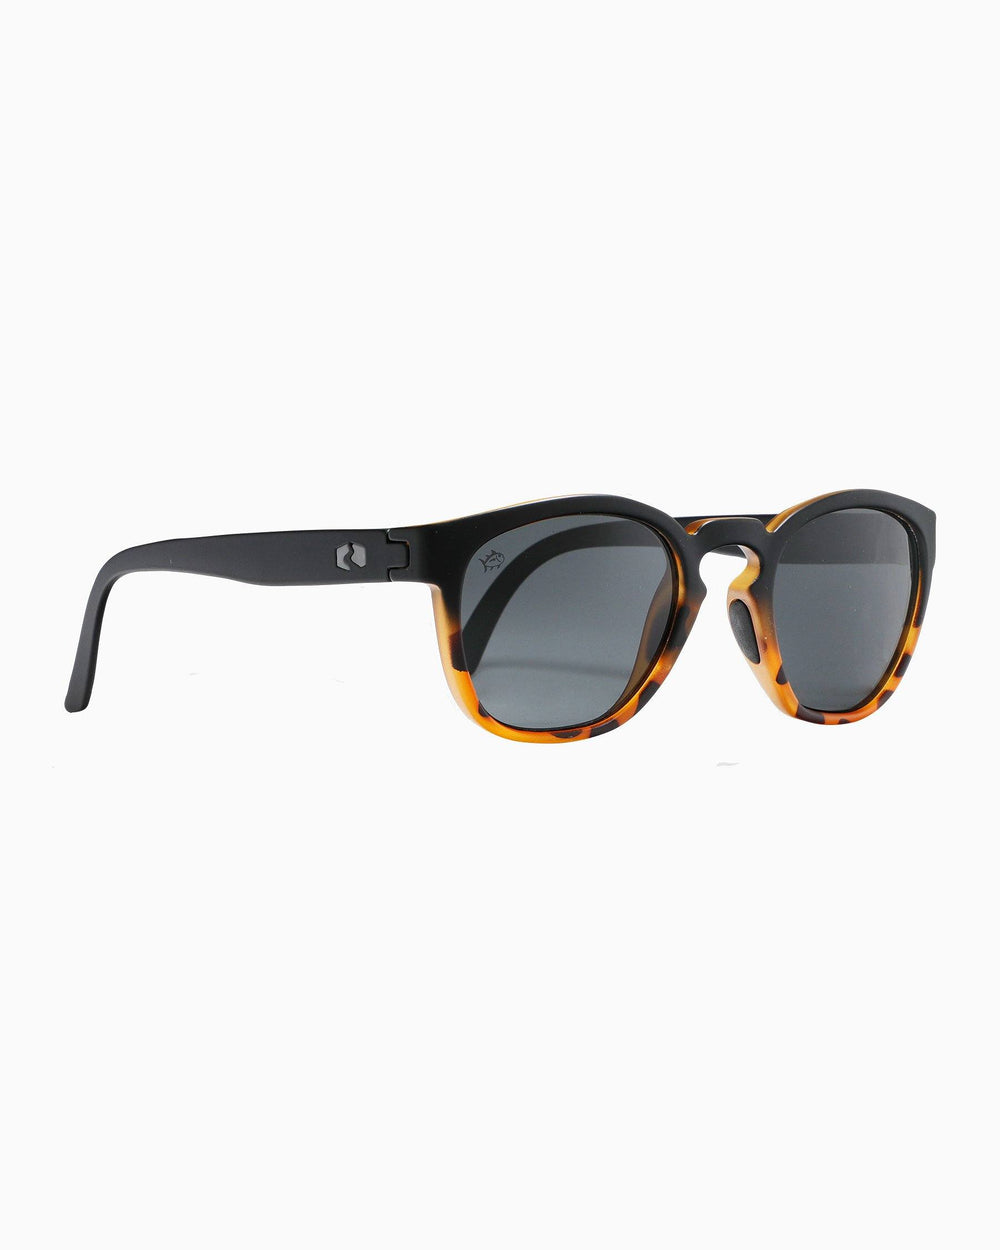 The side of the Rheos Seabrooks Sunglasses by Southern Tide - Gradient Gunmetal